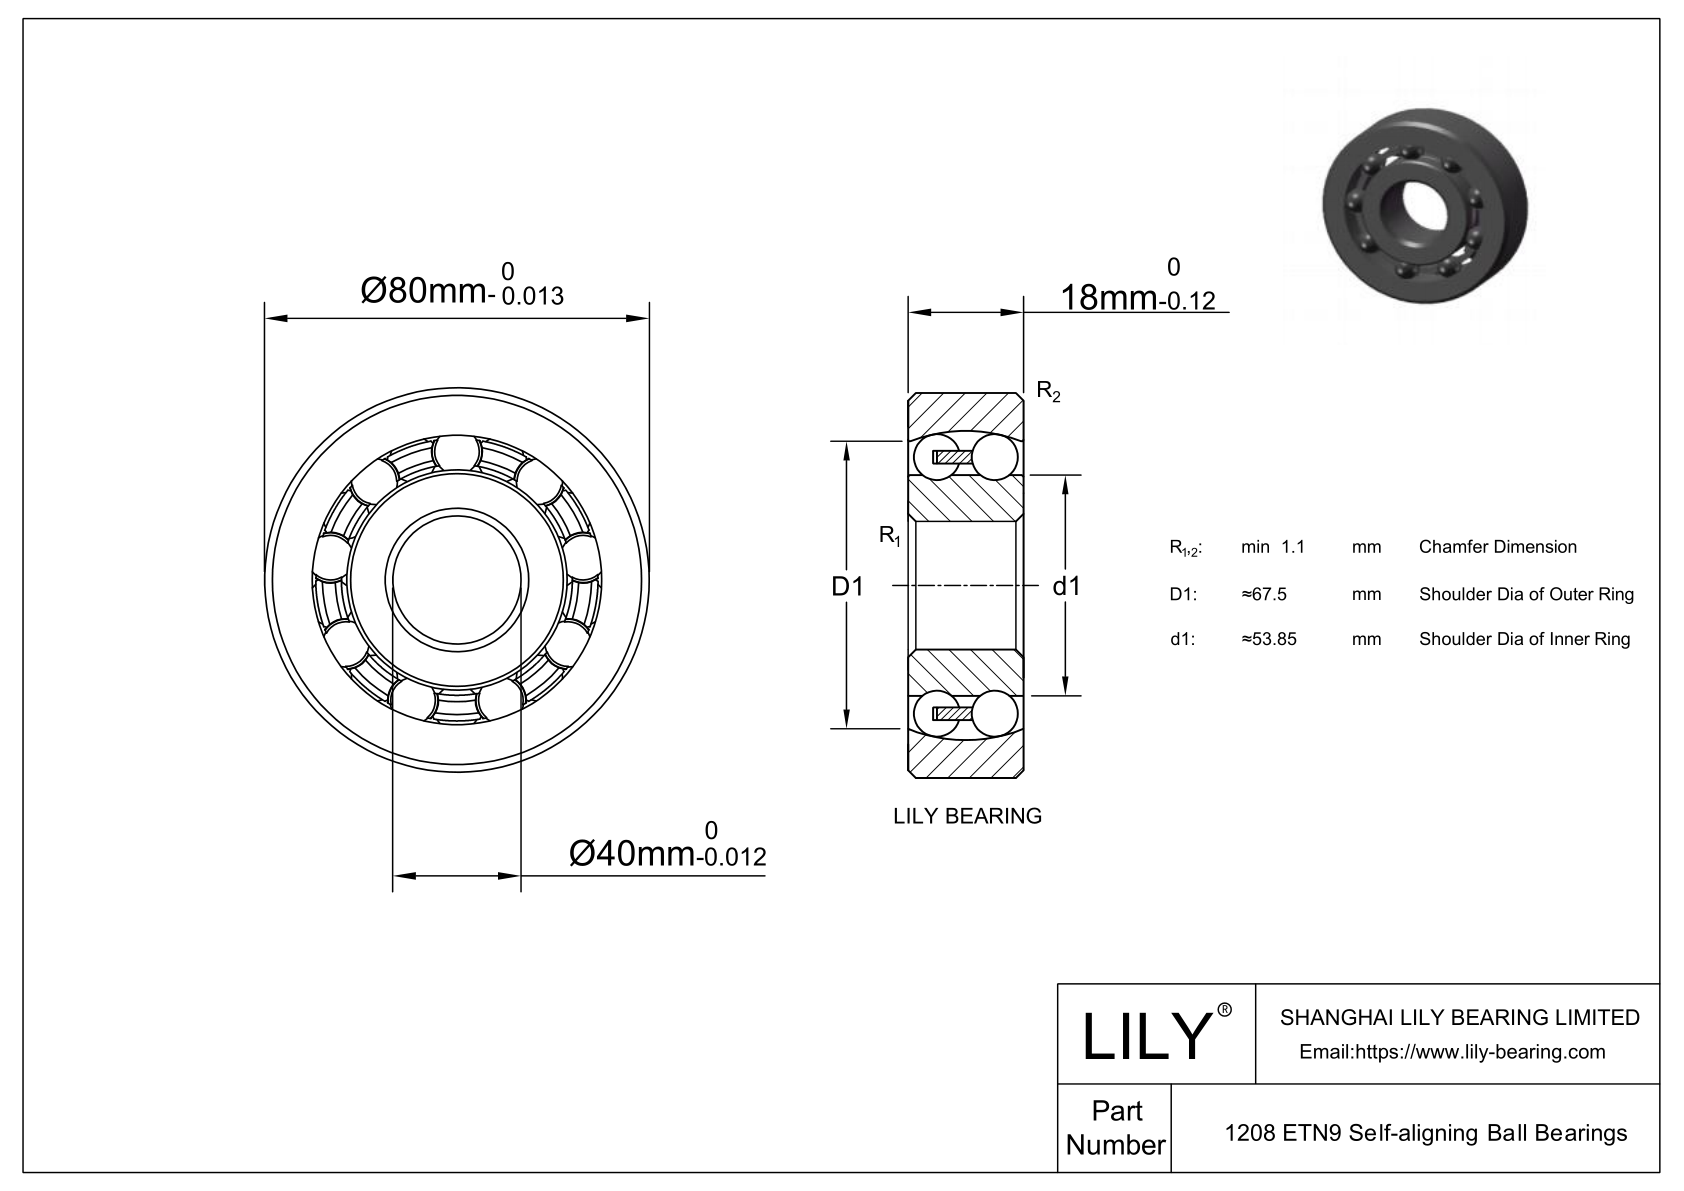 S1208 ETN9 Stainless Steel Self Aligning Ball Bearings cad drawing